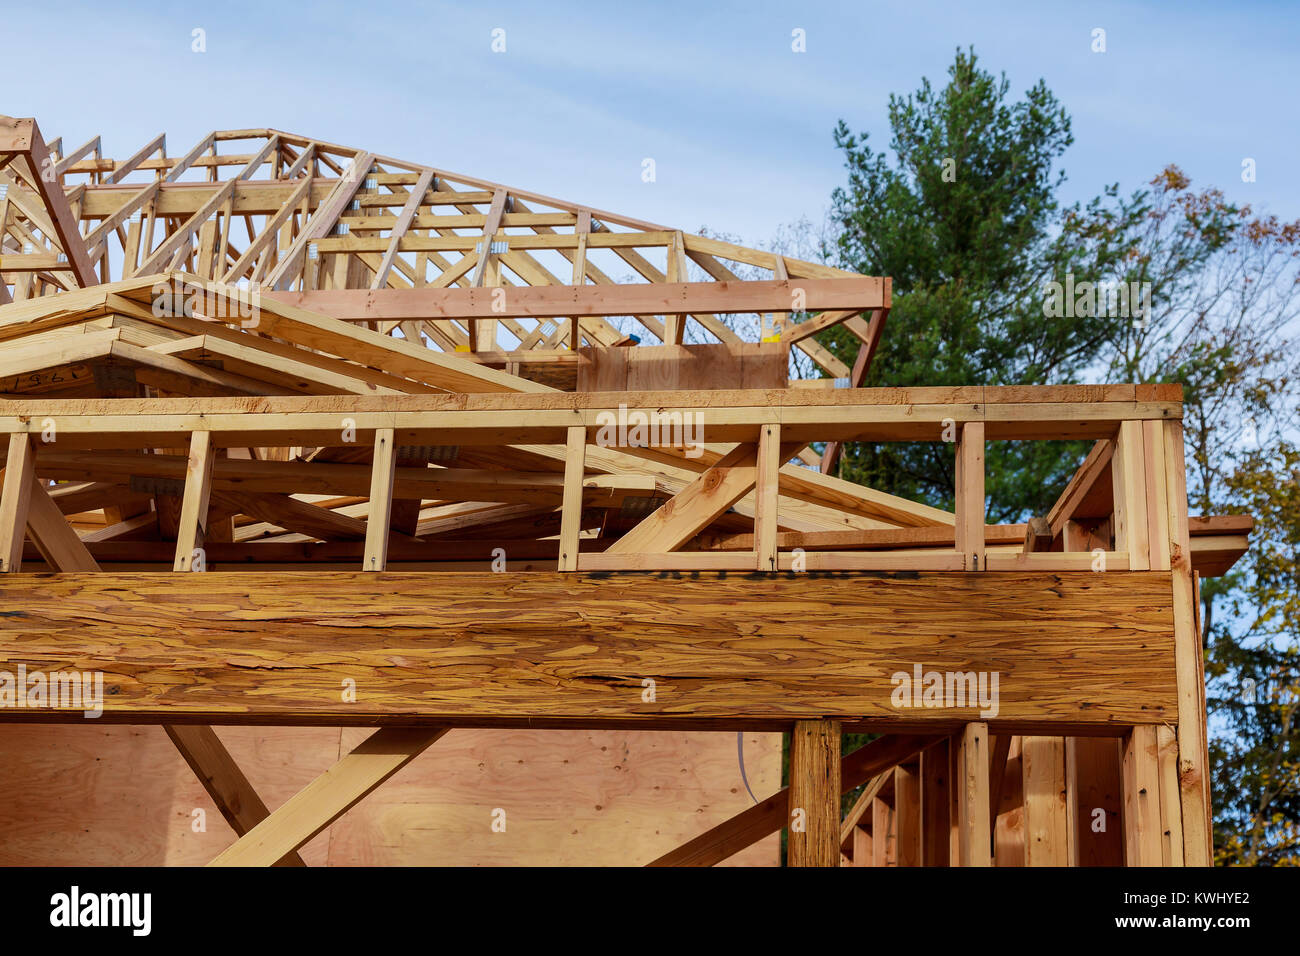 New build roof with wooden truss, post and beam framework. New home construction framing Timber frame house, real estate. Stock Photo